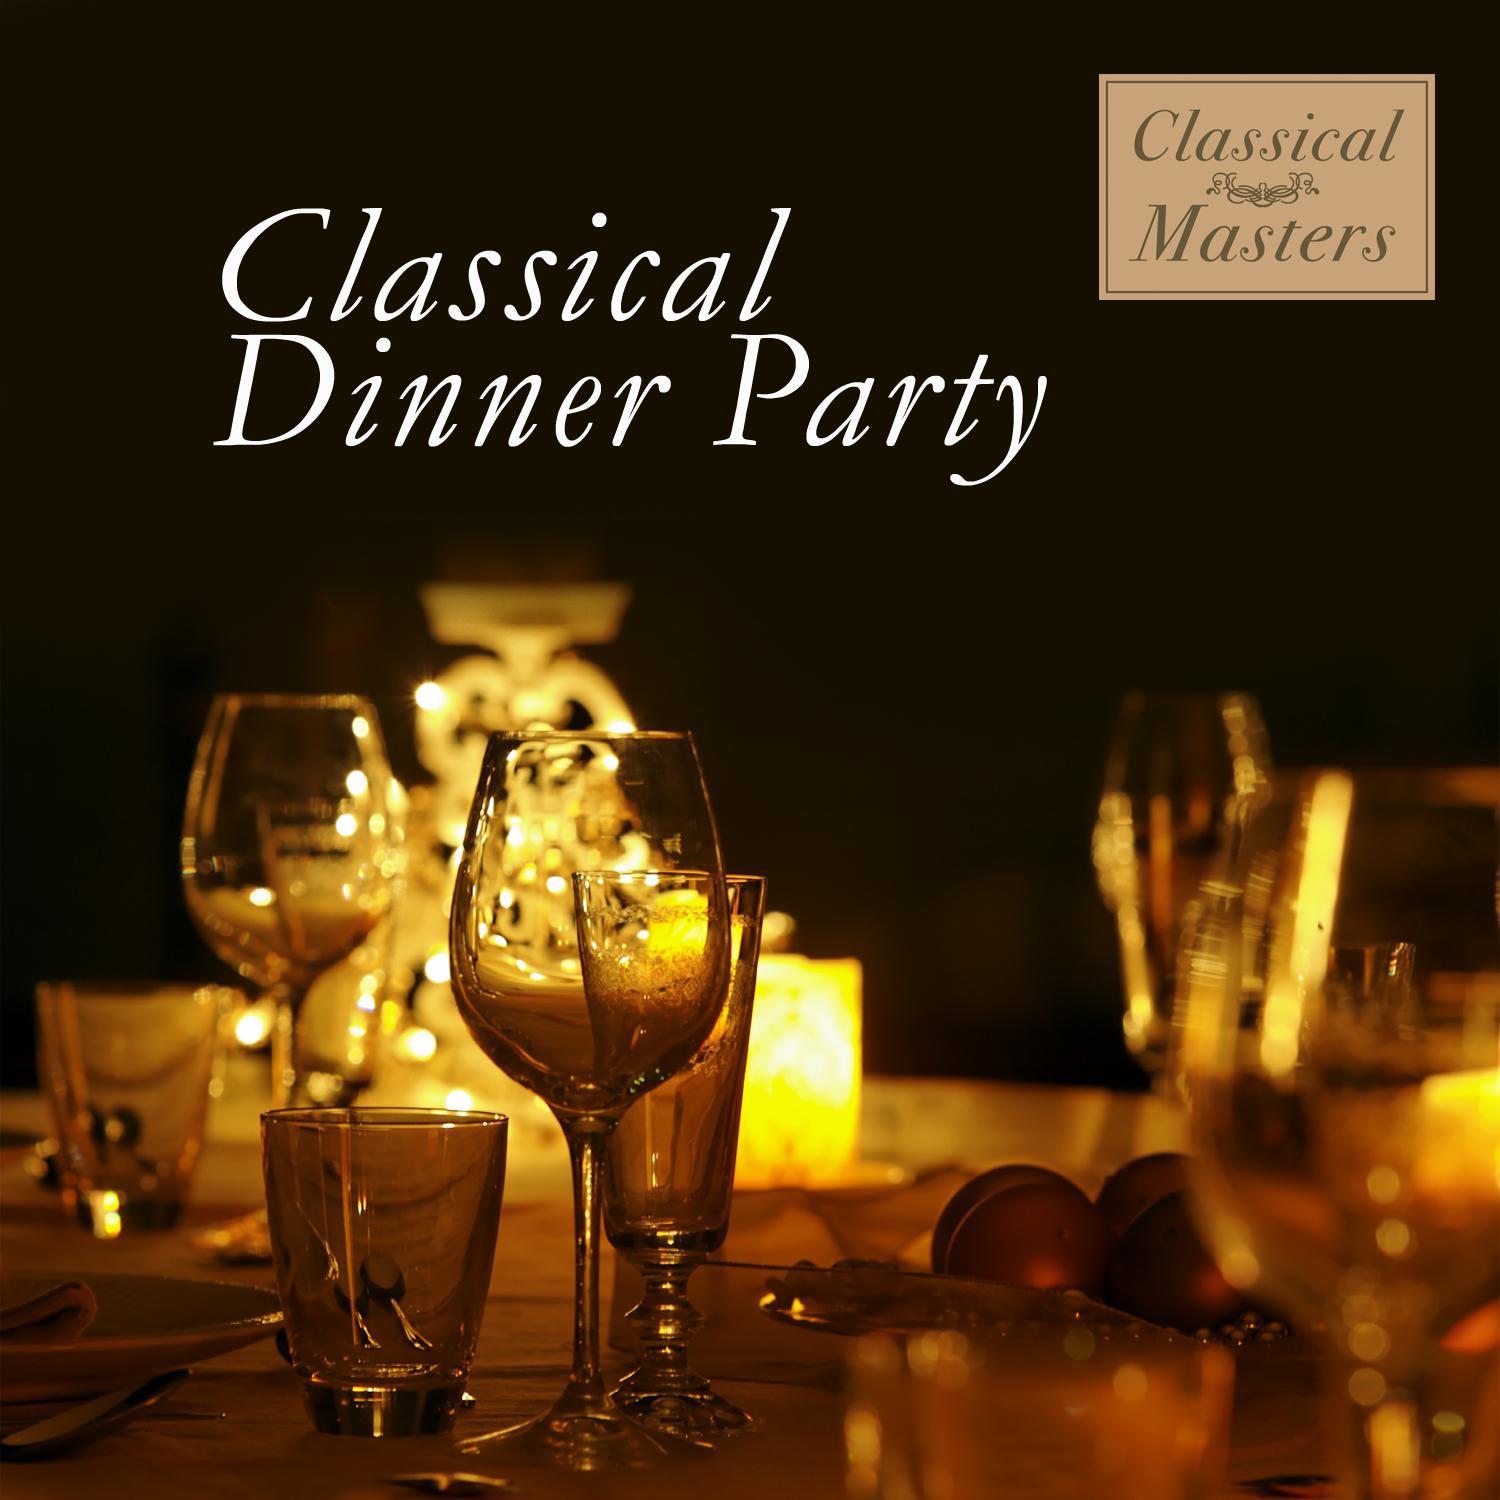 Classical Dinner Party